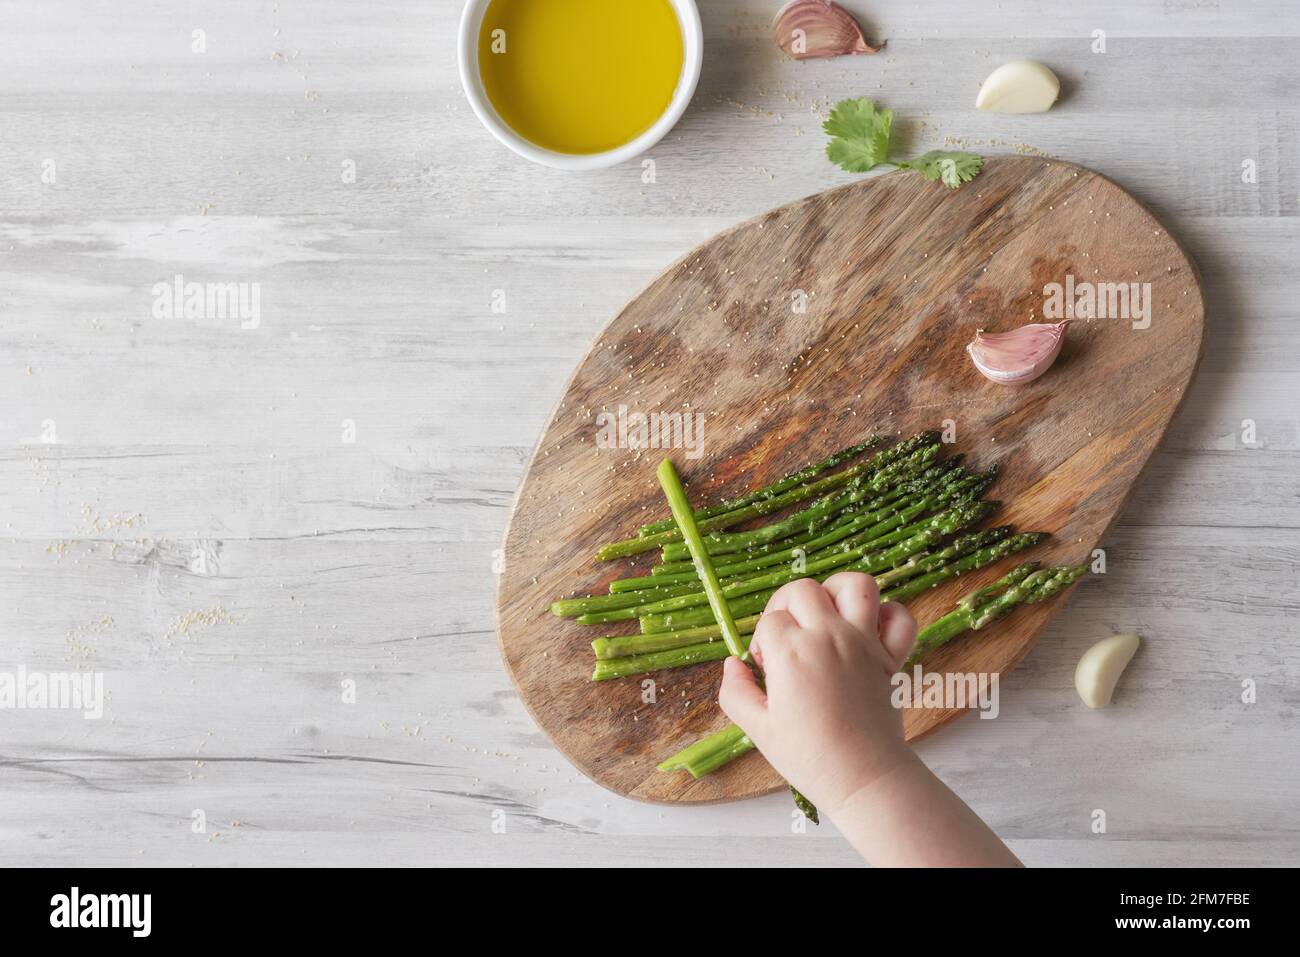 Top view of a woman's hand arranging green asparaguses on a wooden board in the kitchen Stock Photo